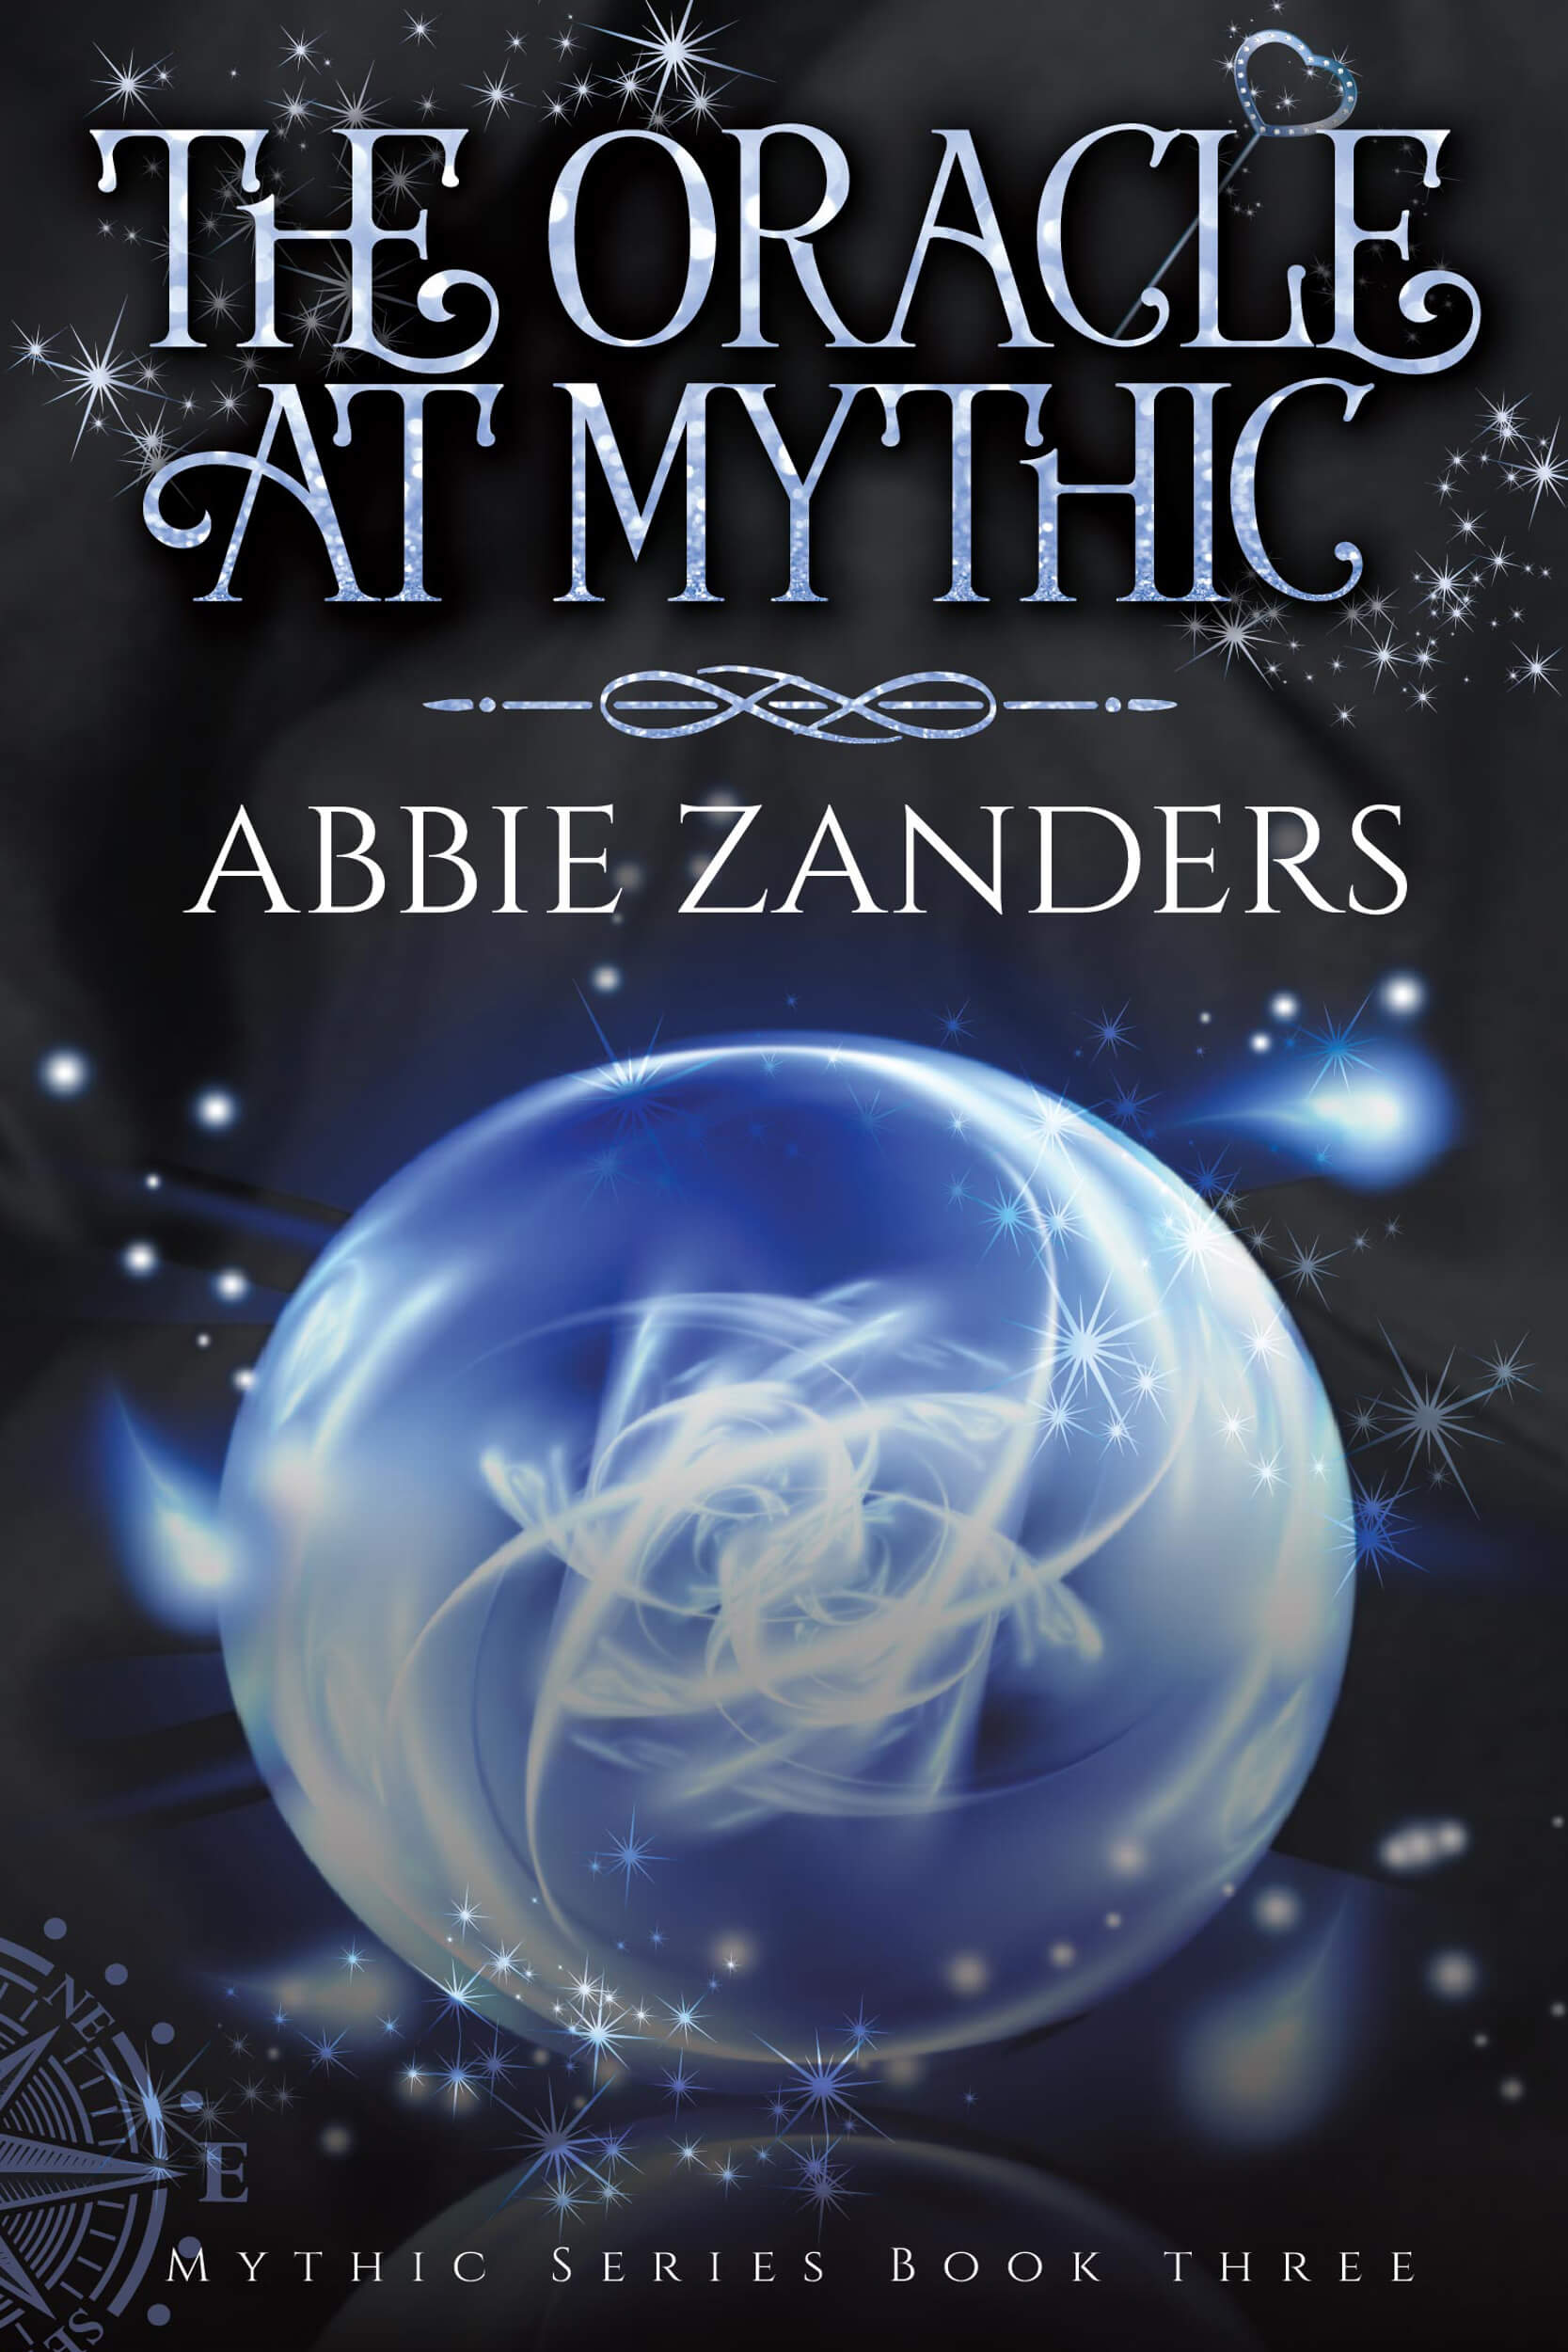 The Oracle at Mythic (Mythic, Book 3)